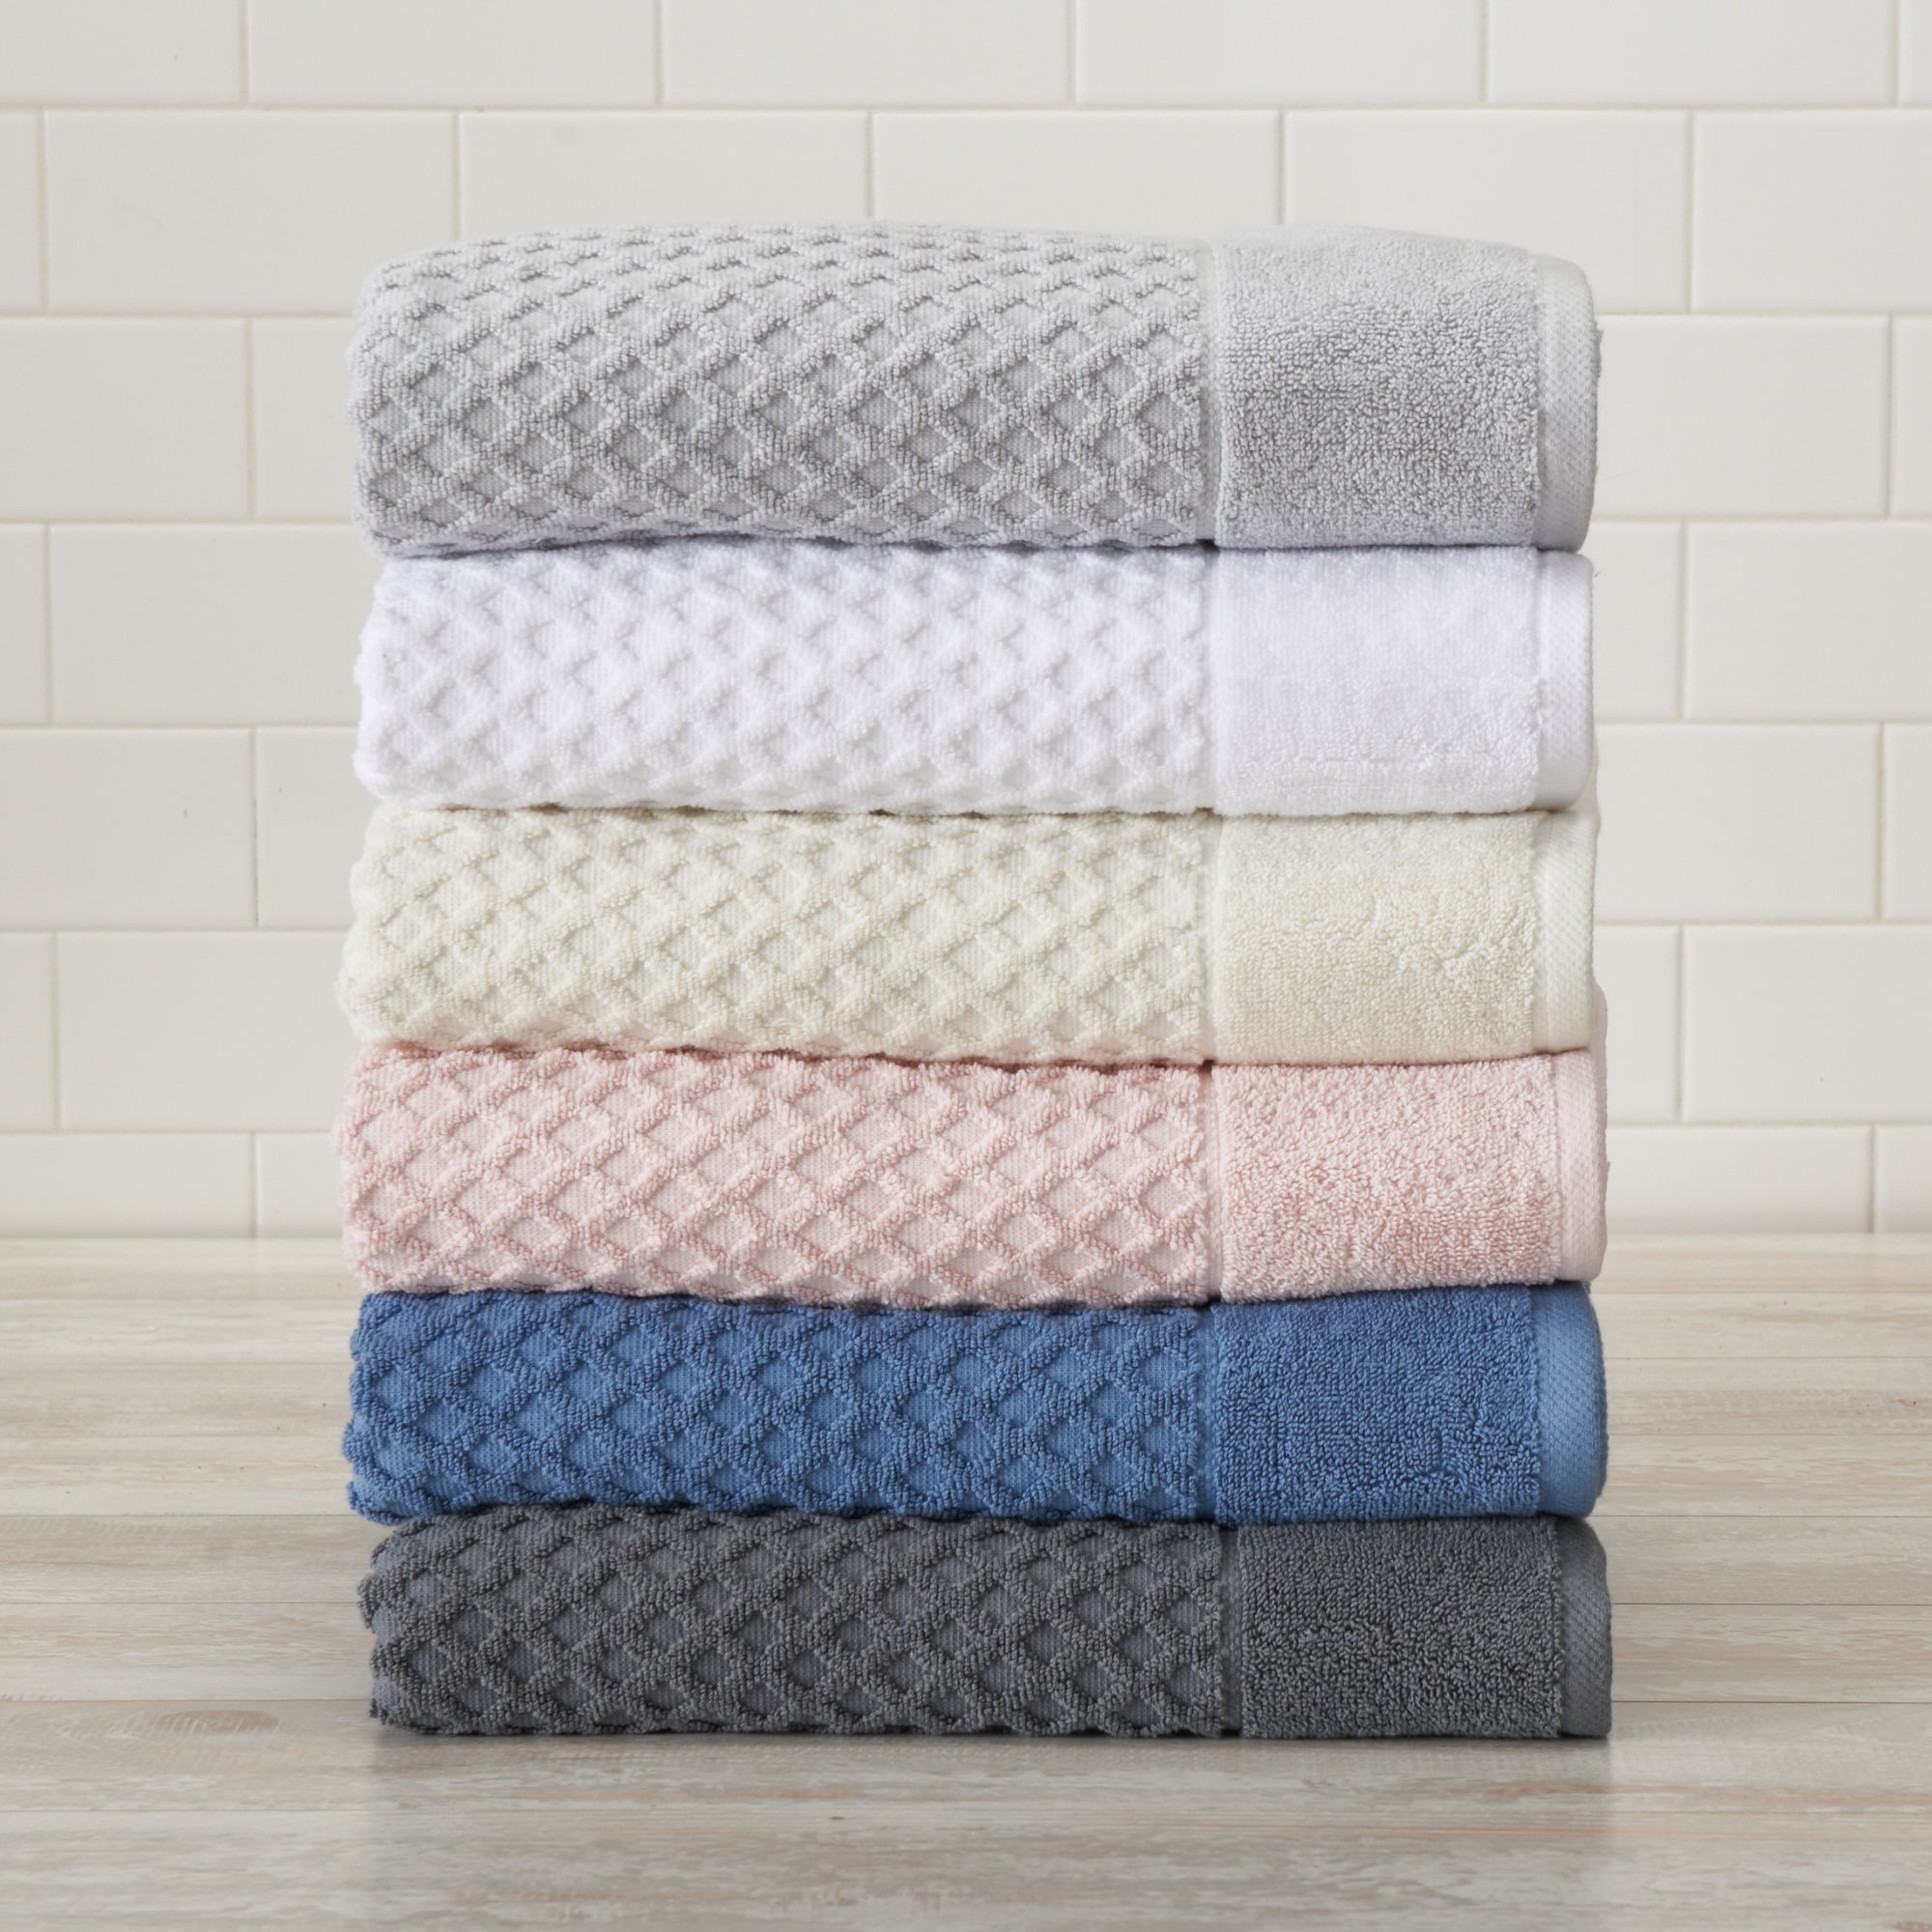 https://ak1.ostkcdn.com/images/products/is/images/direct/2c2392169b09b148e899af4d2cdb29204a633a8a/Cotton-Textured-Towel-Set-Grayson-Collection.jpg